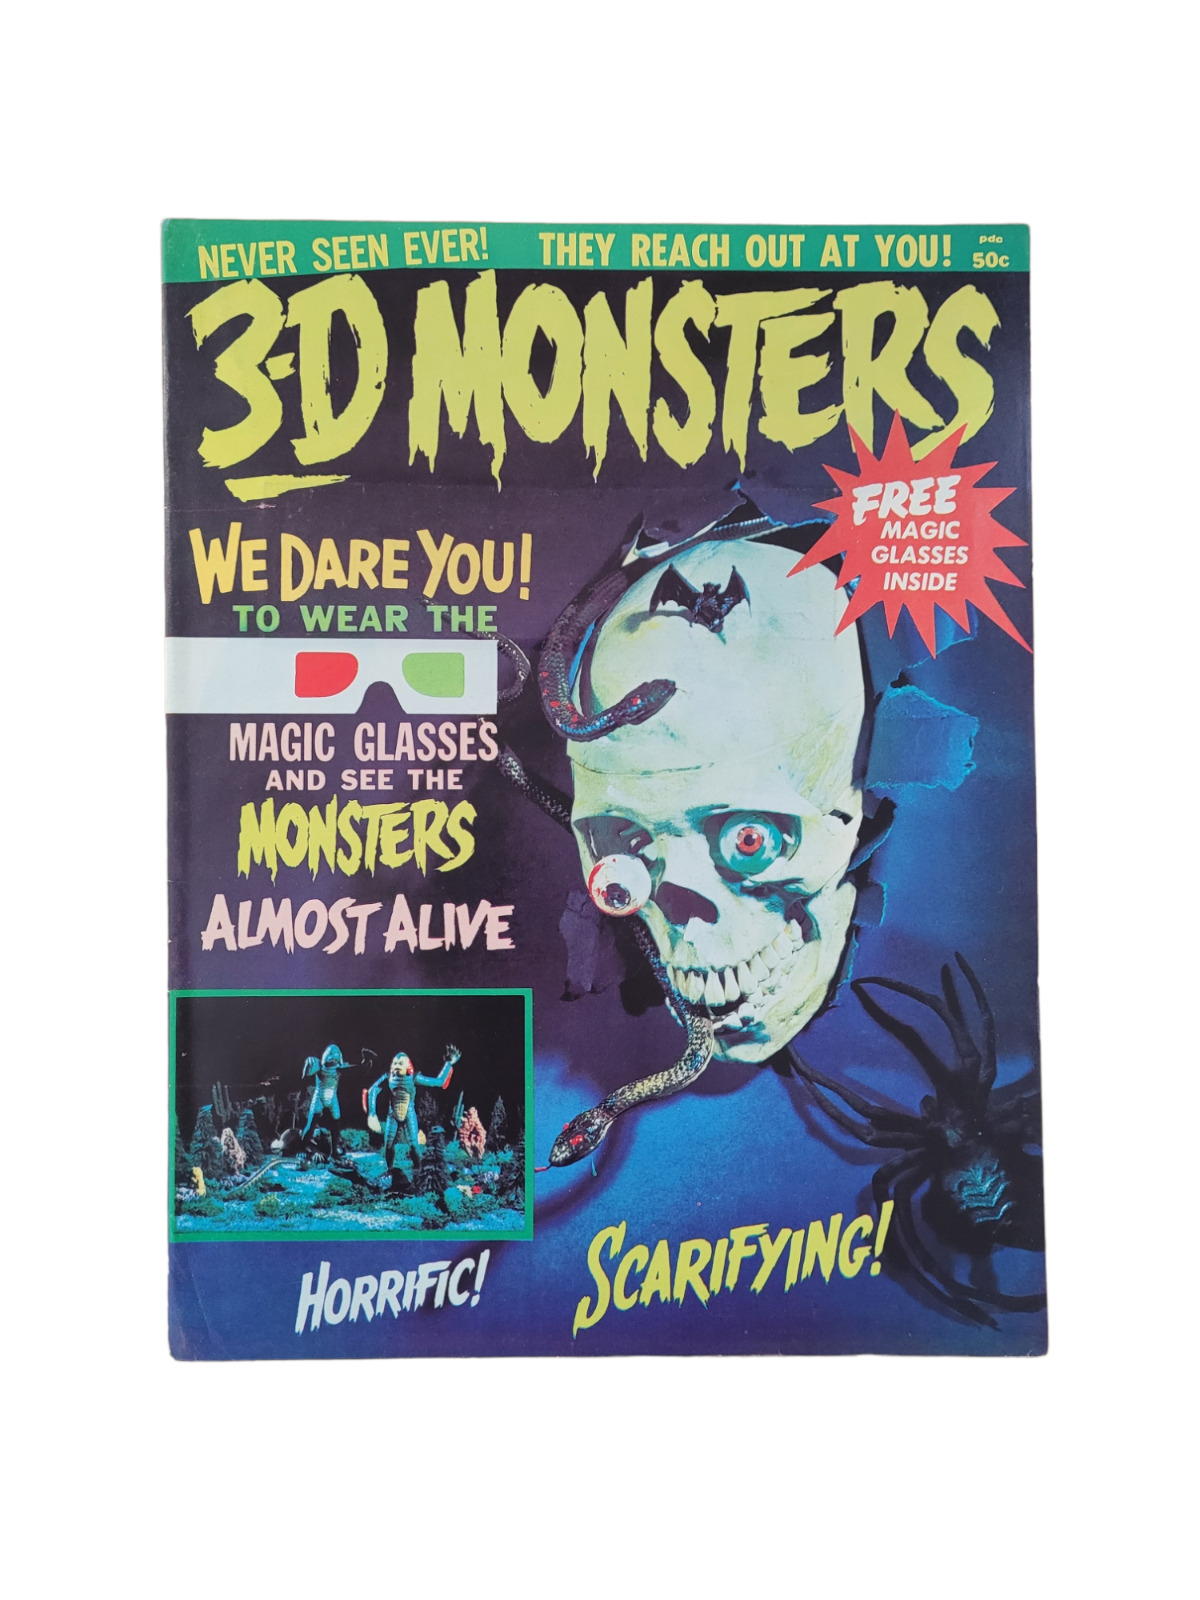 3-D Monsters #1 1964 scarce issue in great condition Horror Sci Fi Vintage RAW